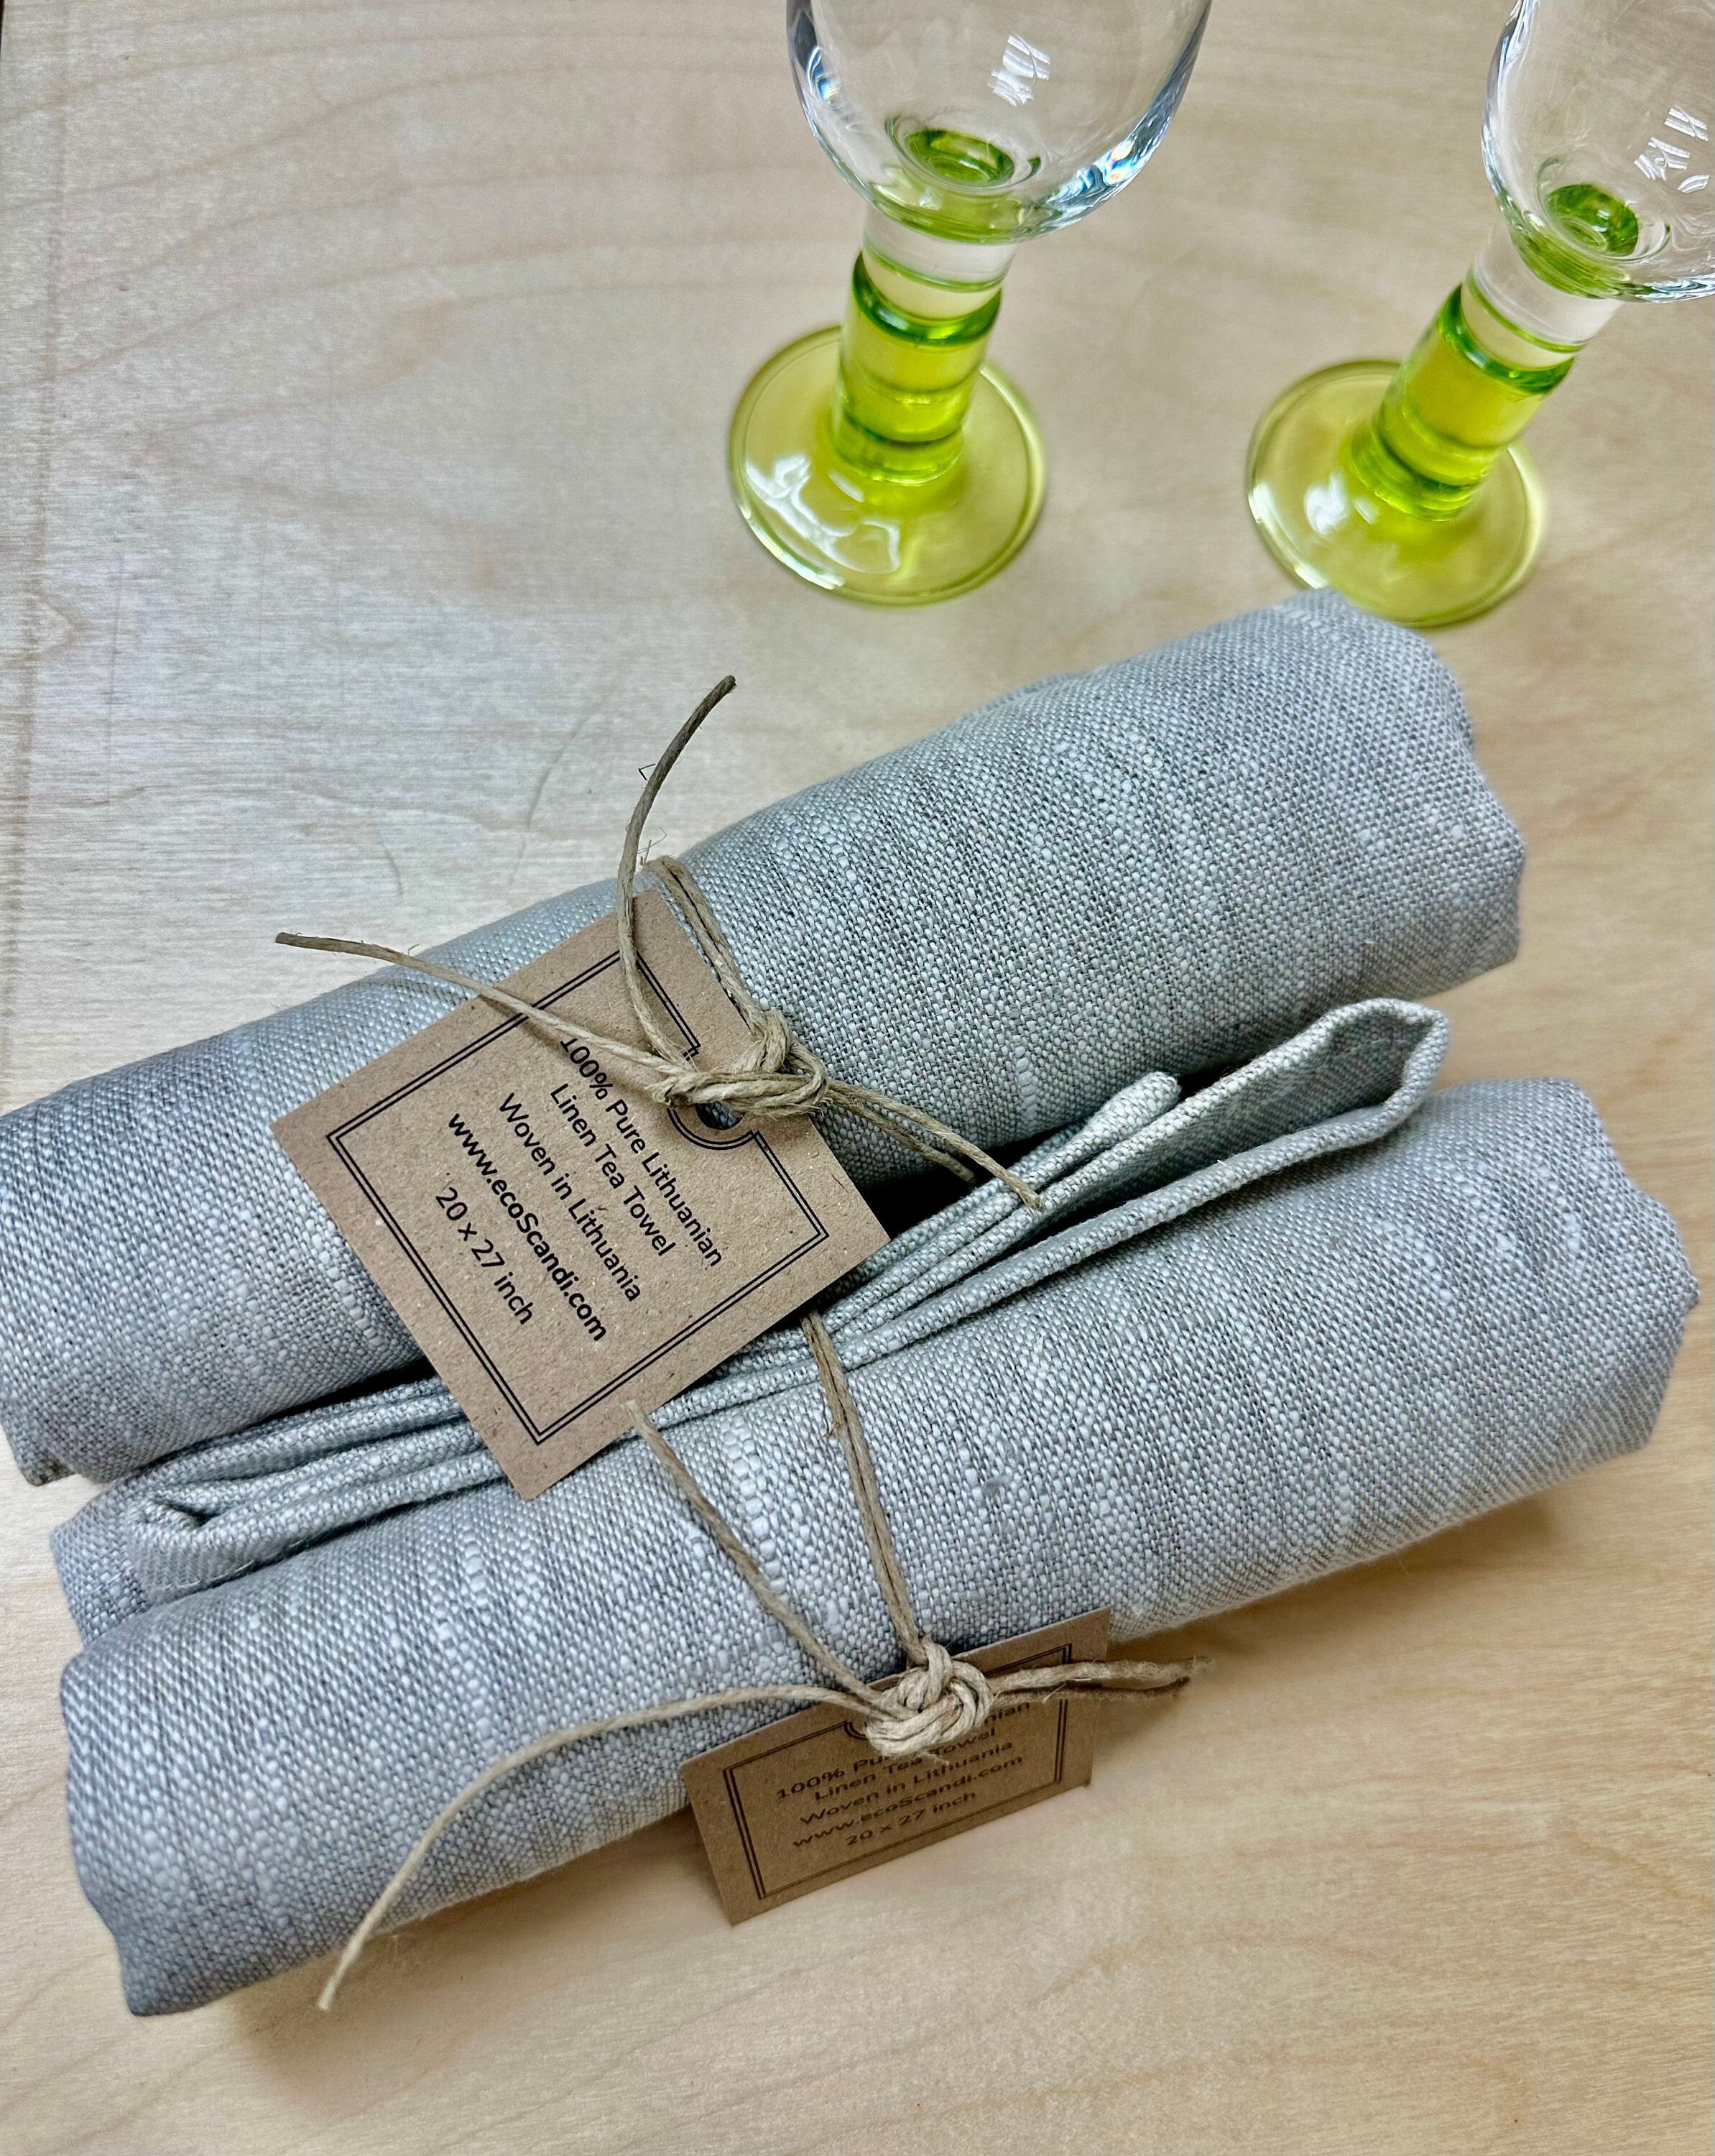 Stonewashed linen - pure 100% flax linen kitchen tea towel hand towel  heather light green with white stripes stone washed pre-washed laundered  Europe European linen lint free fast dry eco-friendly natural living –